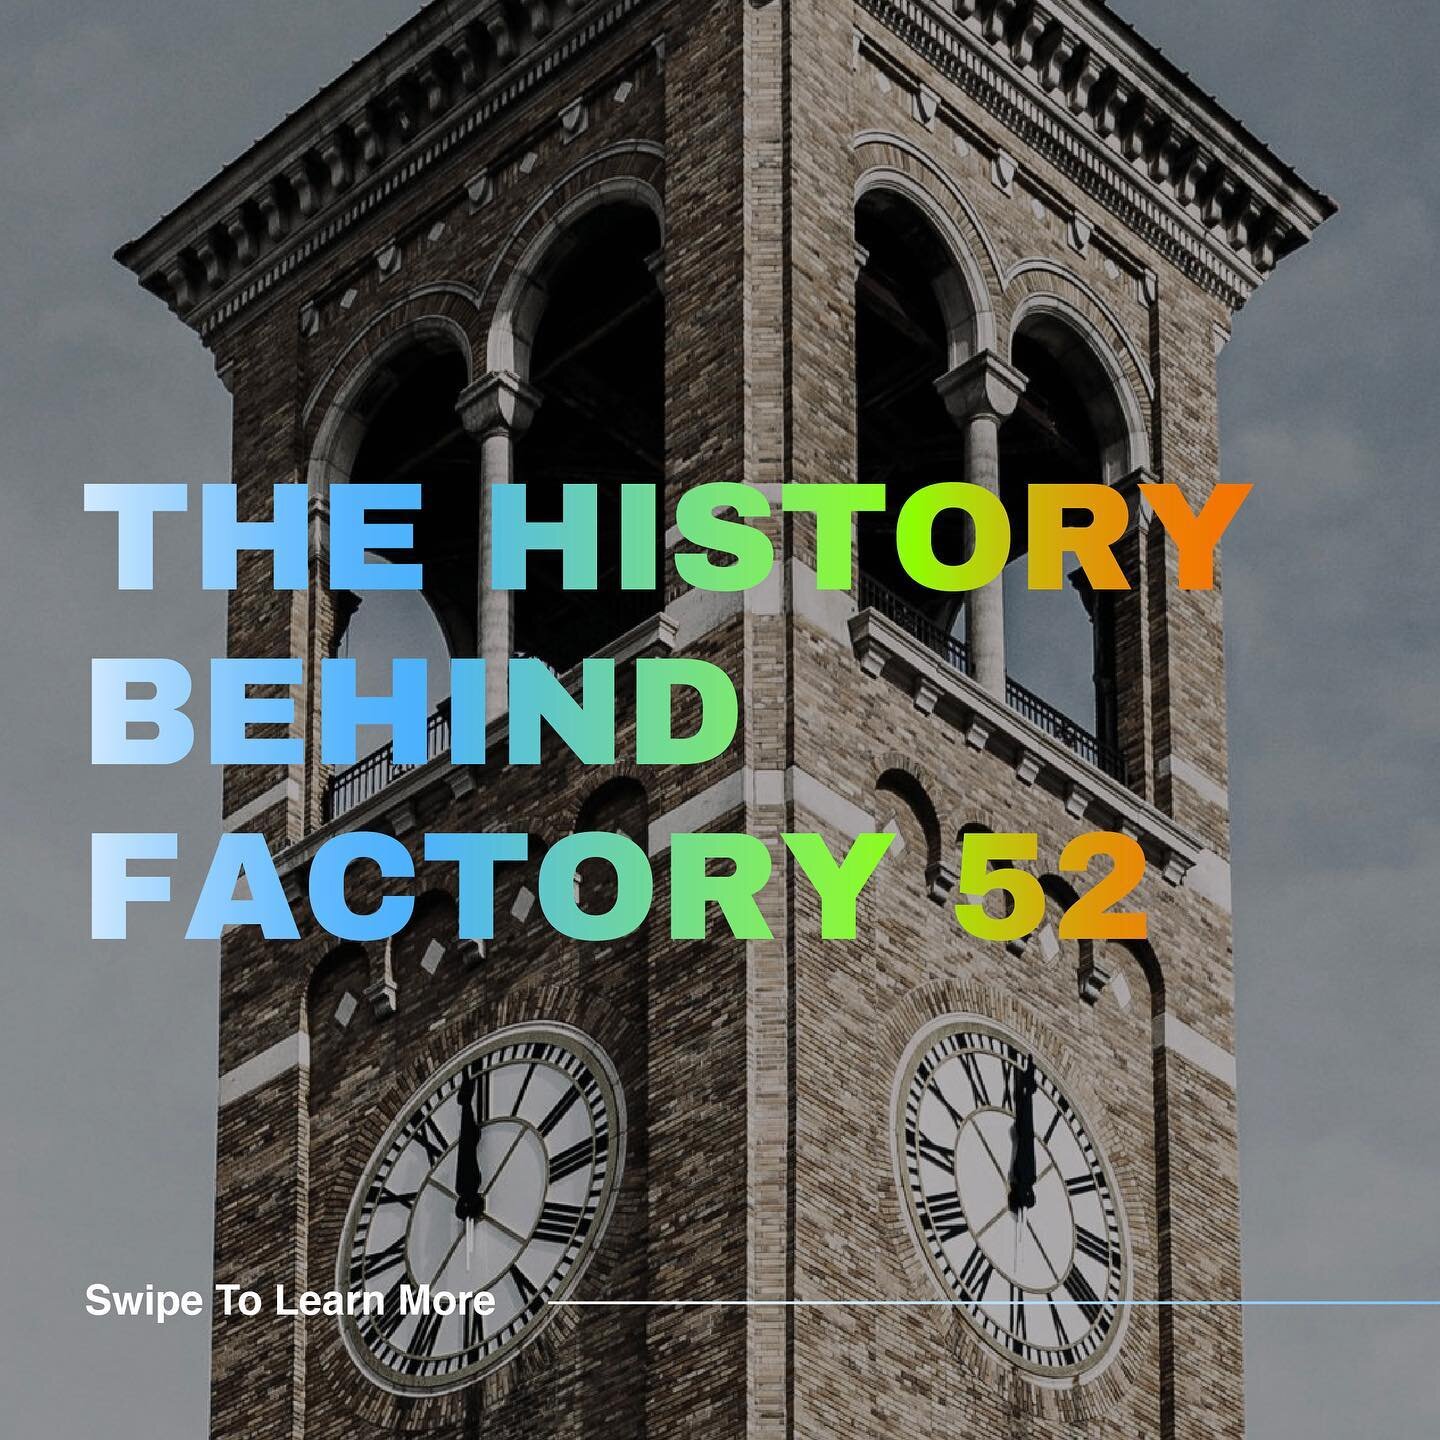 ✨ The history behind Factory 52 ✨

Step into the captivating journey of Factory 52 in Norwood, Ohio, where history and innovation intertwine. From its origins as the home of The United States Playing Card Co. (@uspcc) in 1894 to its present-day trans